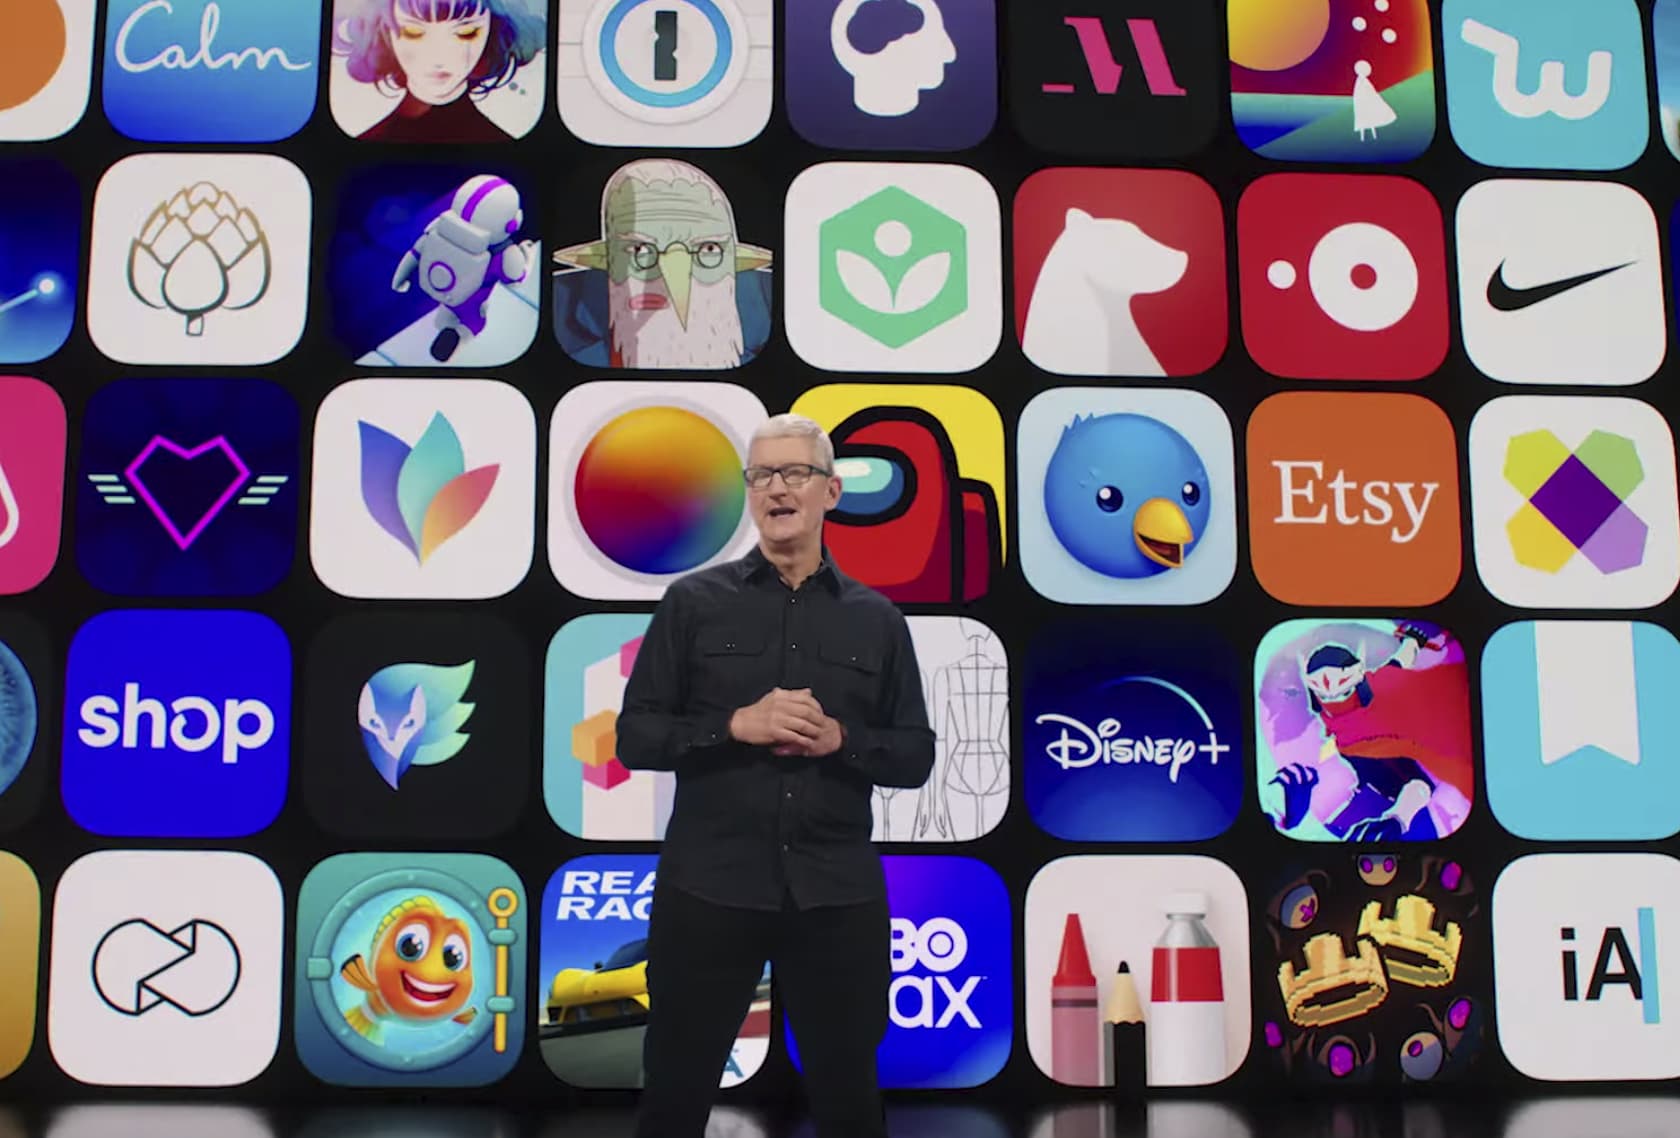 Developers building ways to skirt Apple’s cut of in-app purchases